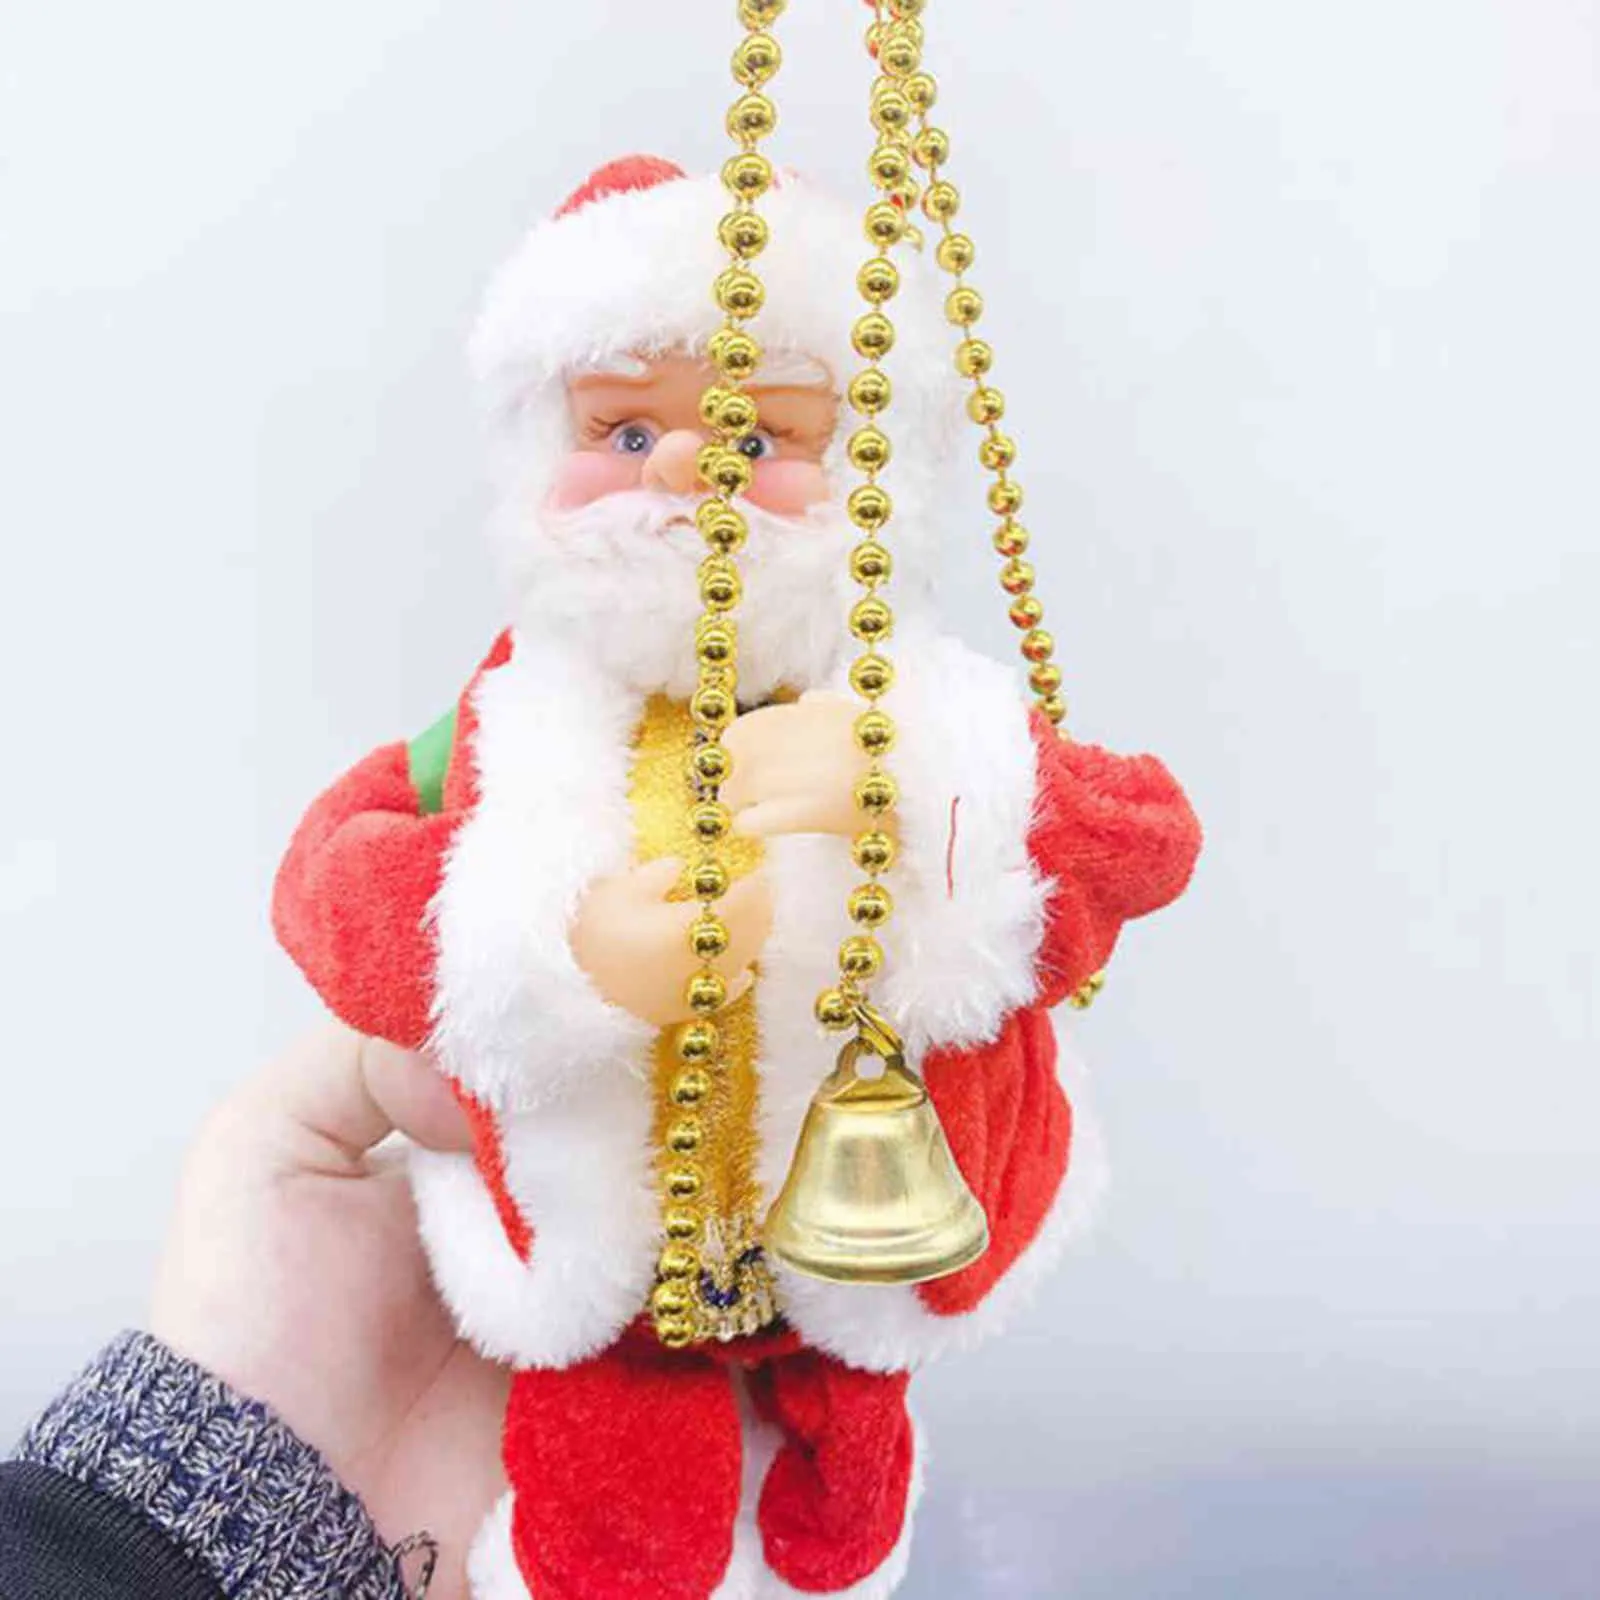 Santa Claus Doll Electric Climbing Toy Crawl Up And Down XMAS Party Christmas Pendant Gift 2022 Christmas Decorations For Home 211104